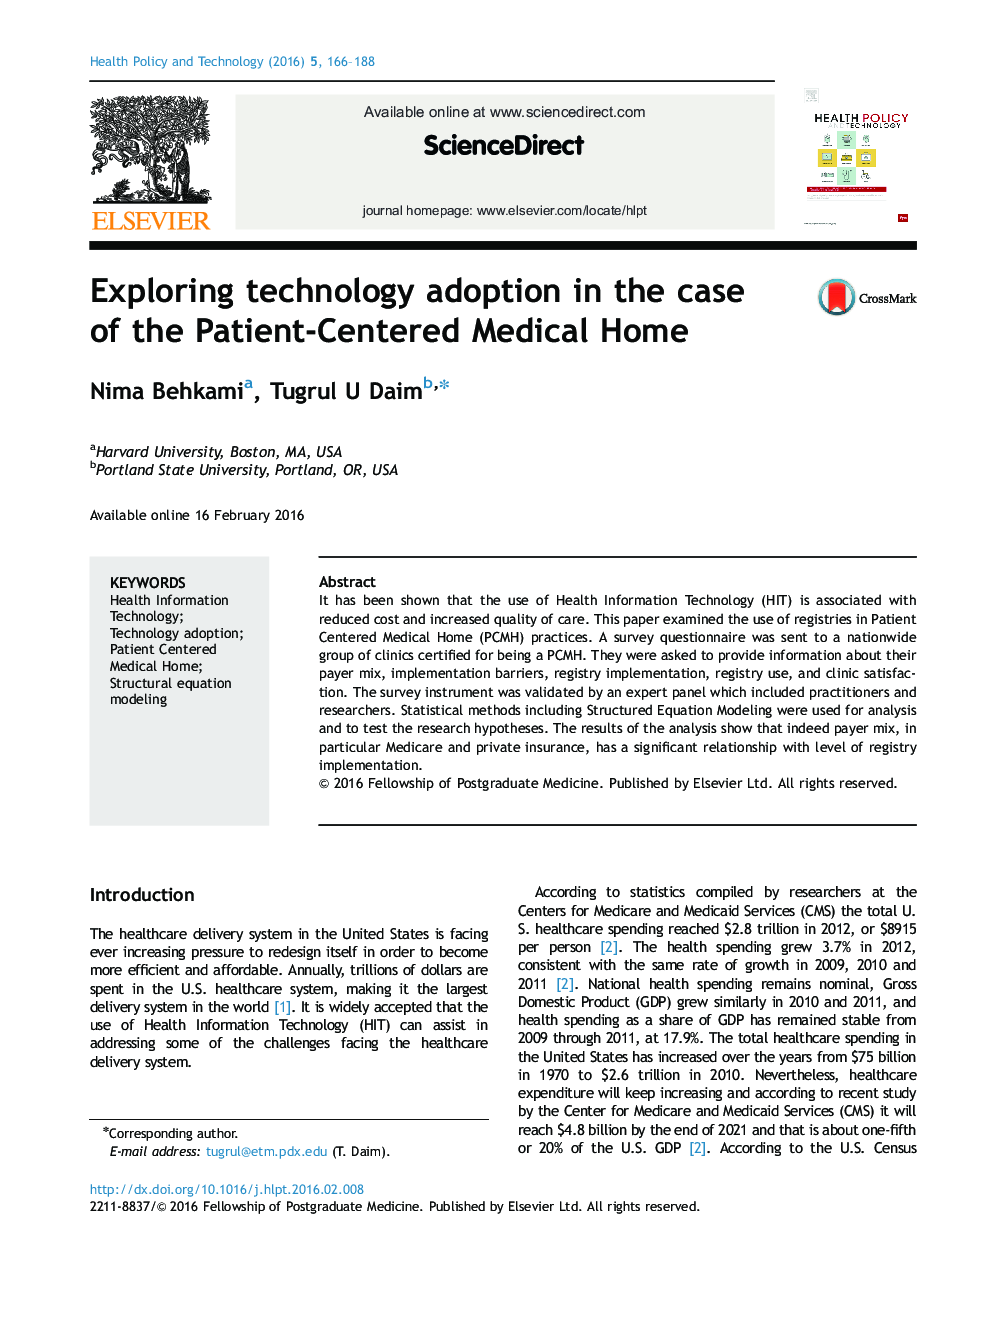 Exploring technology adoption in the case of the Patient-Centered Medical Home